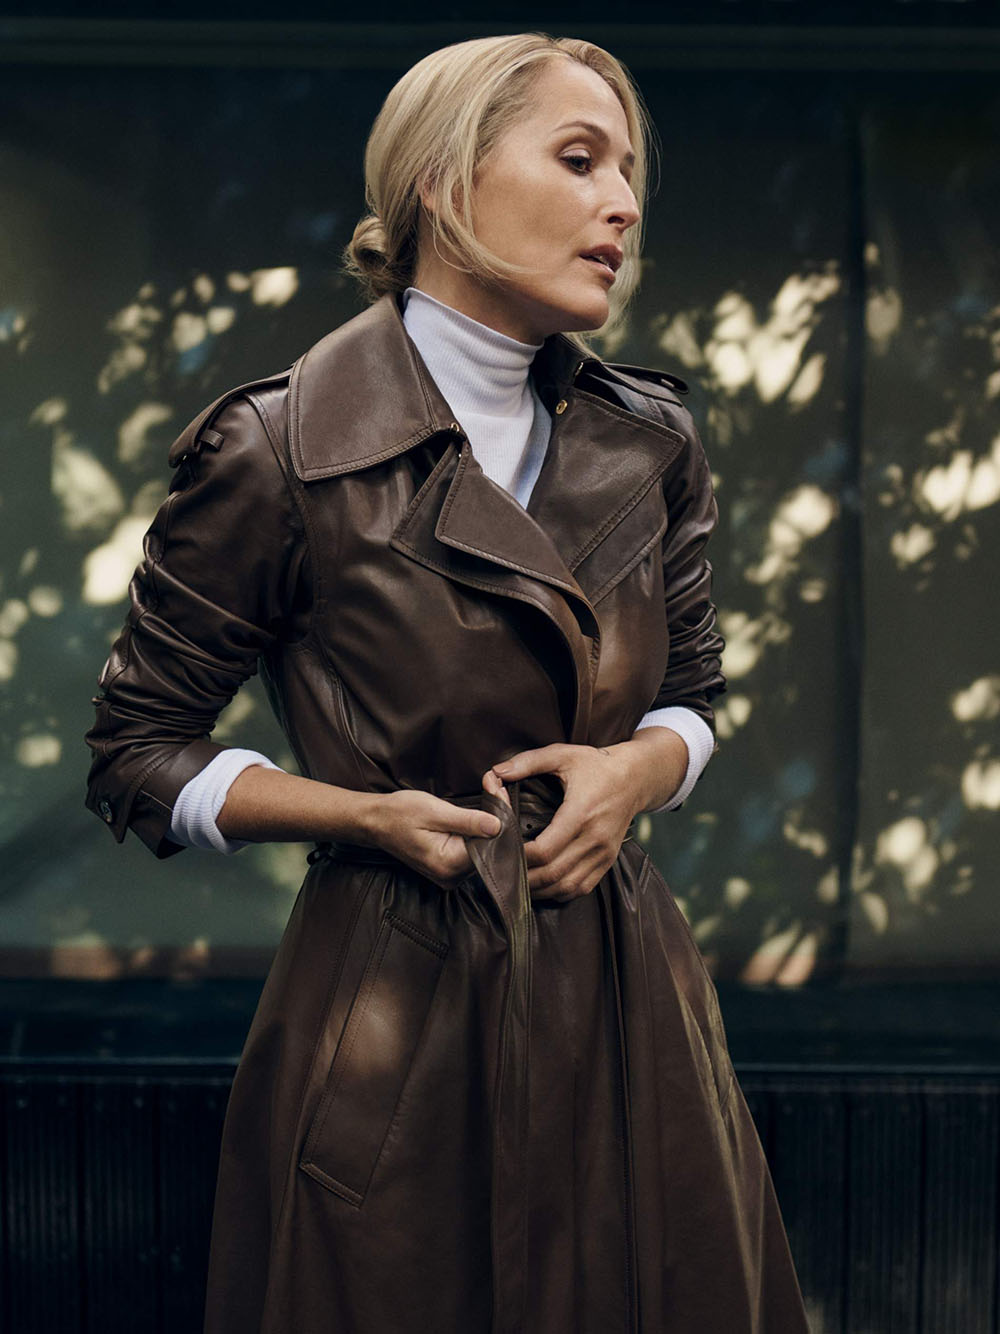 Gillian Anderson covers Porter Magazine November 30th, 2020 by Liz Collins